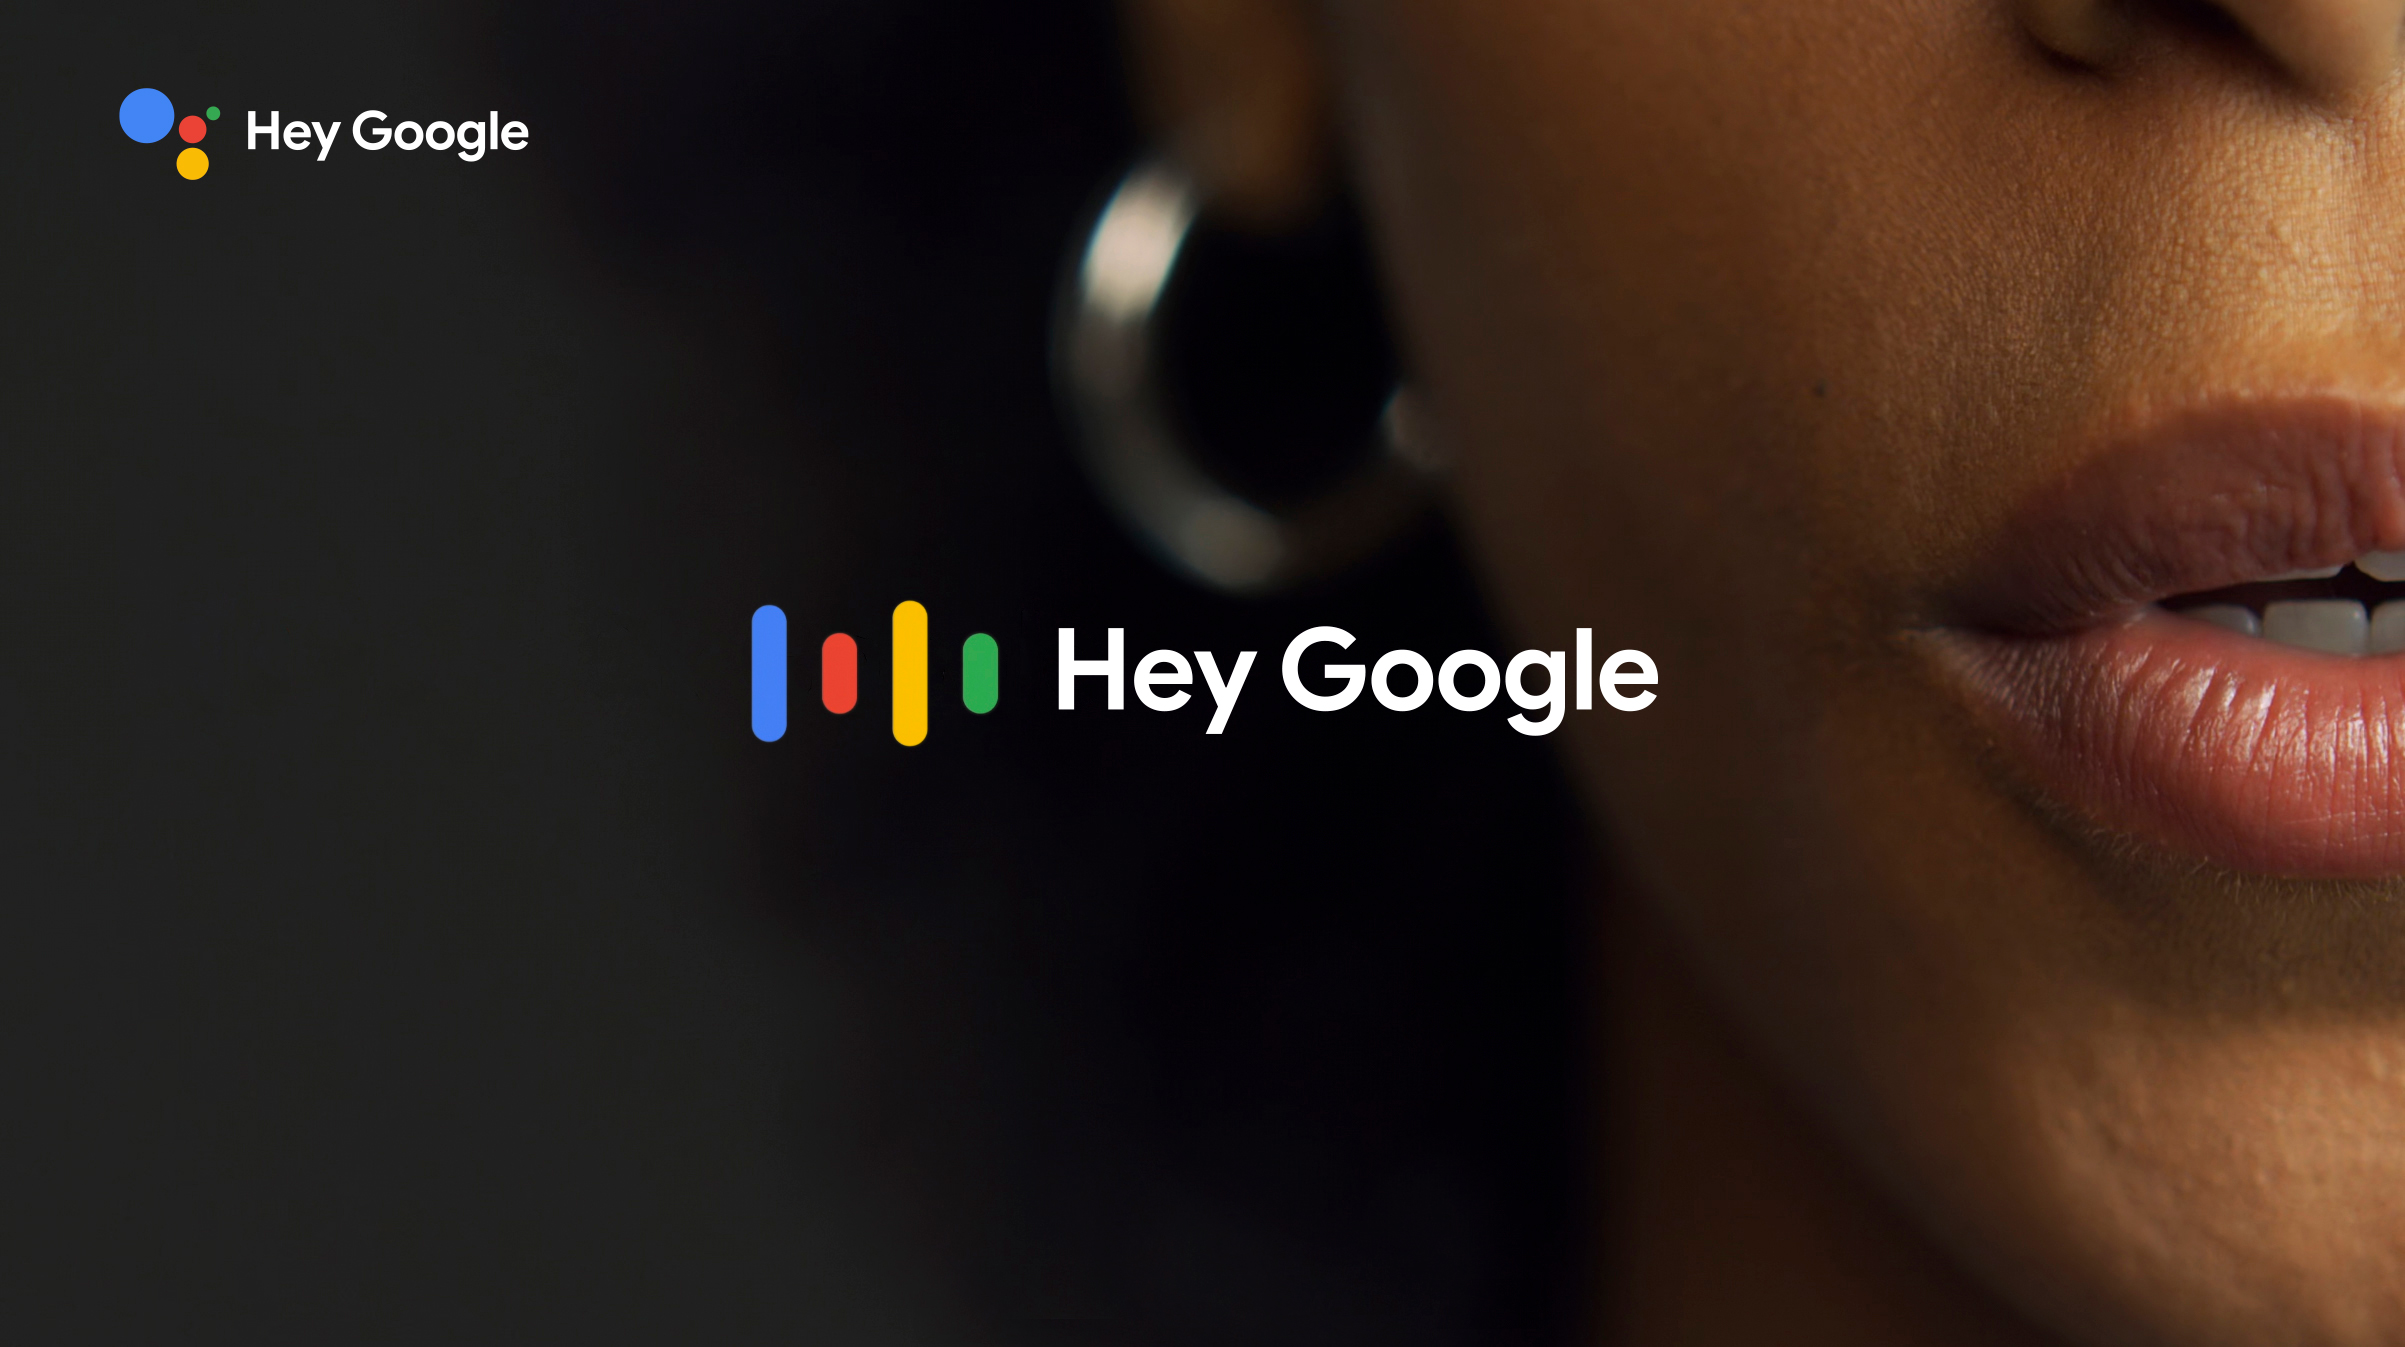 Say hello to your Google Assistant